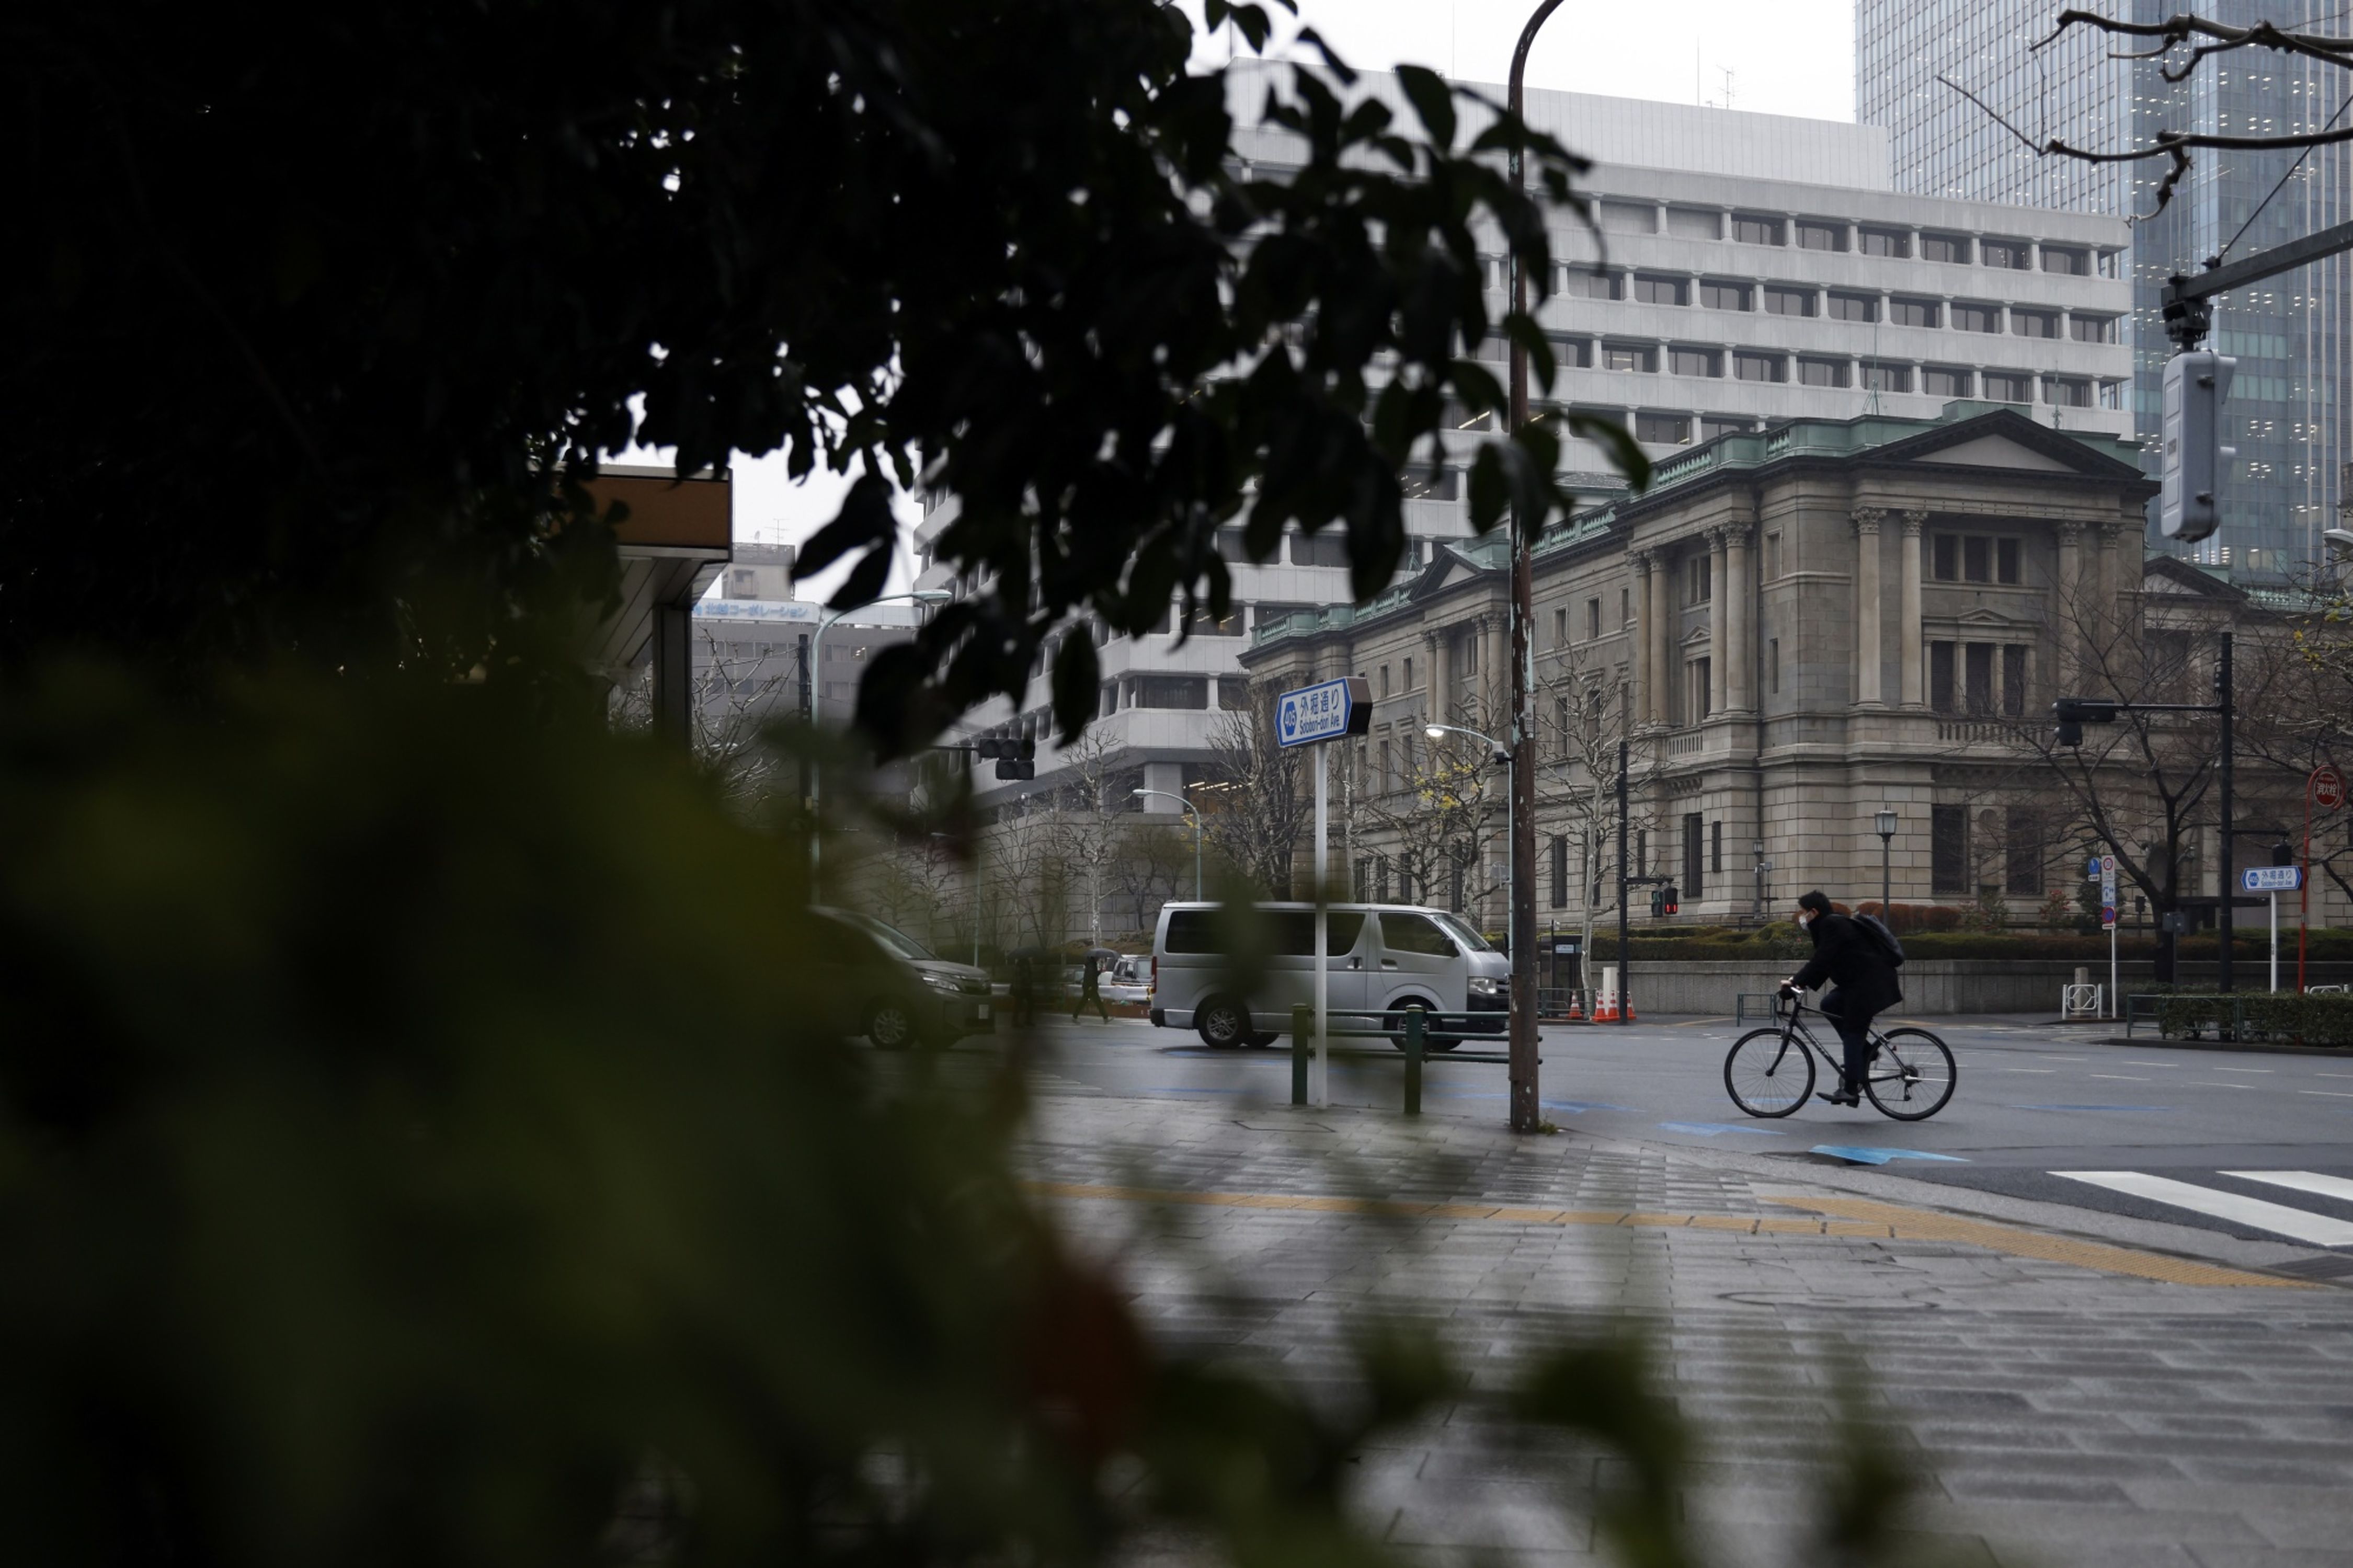 New BOJ governor likely to move away from special stimulus, ex-official says